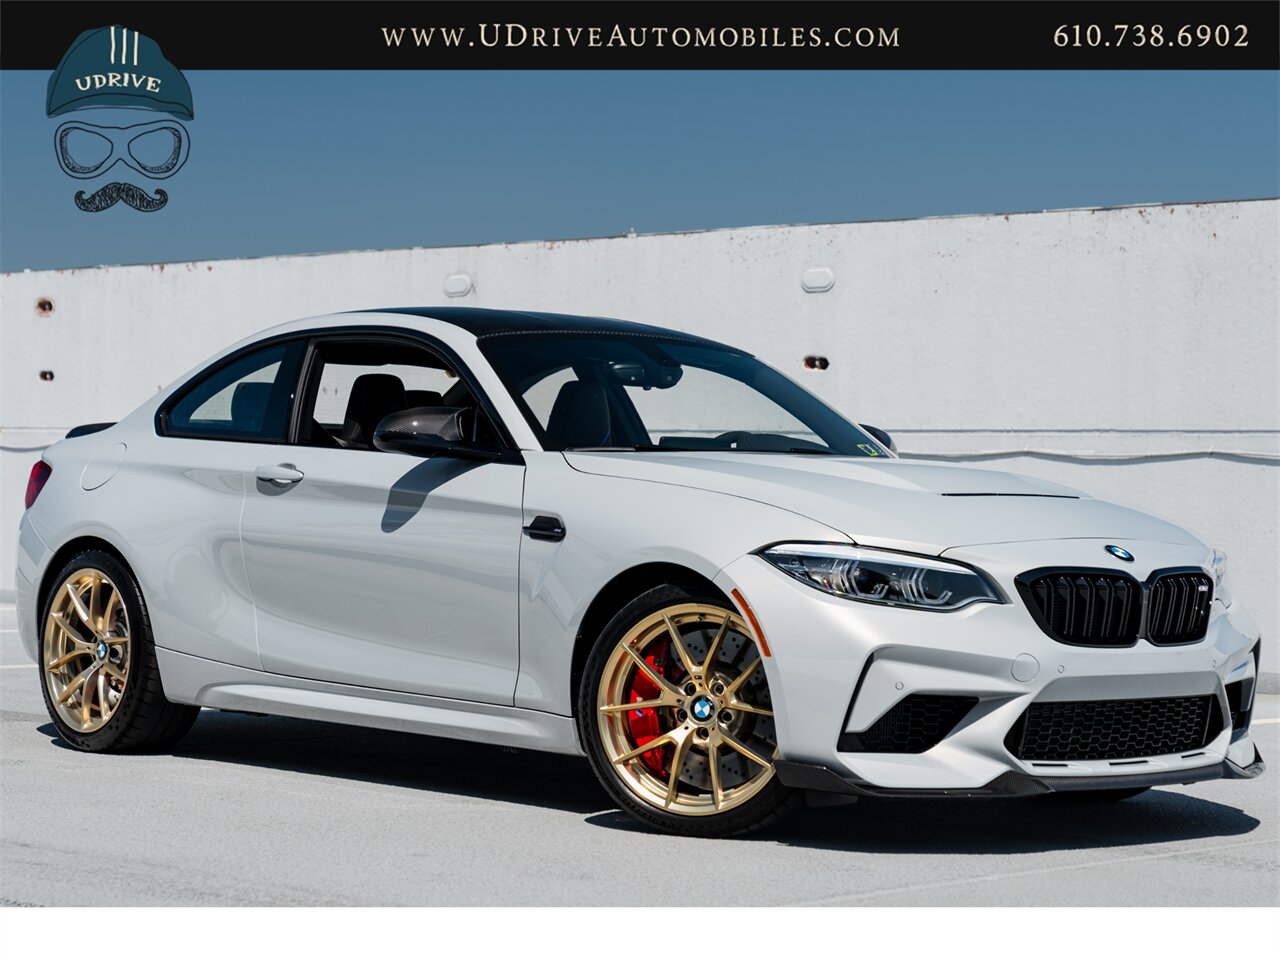 2020 BMW M2 CS  M2 CS 6 Speed Manual 2k Miles Full Body PPF Factory Warranty until 2025 - Photo 3 - West Chester, PA 19382